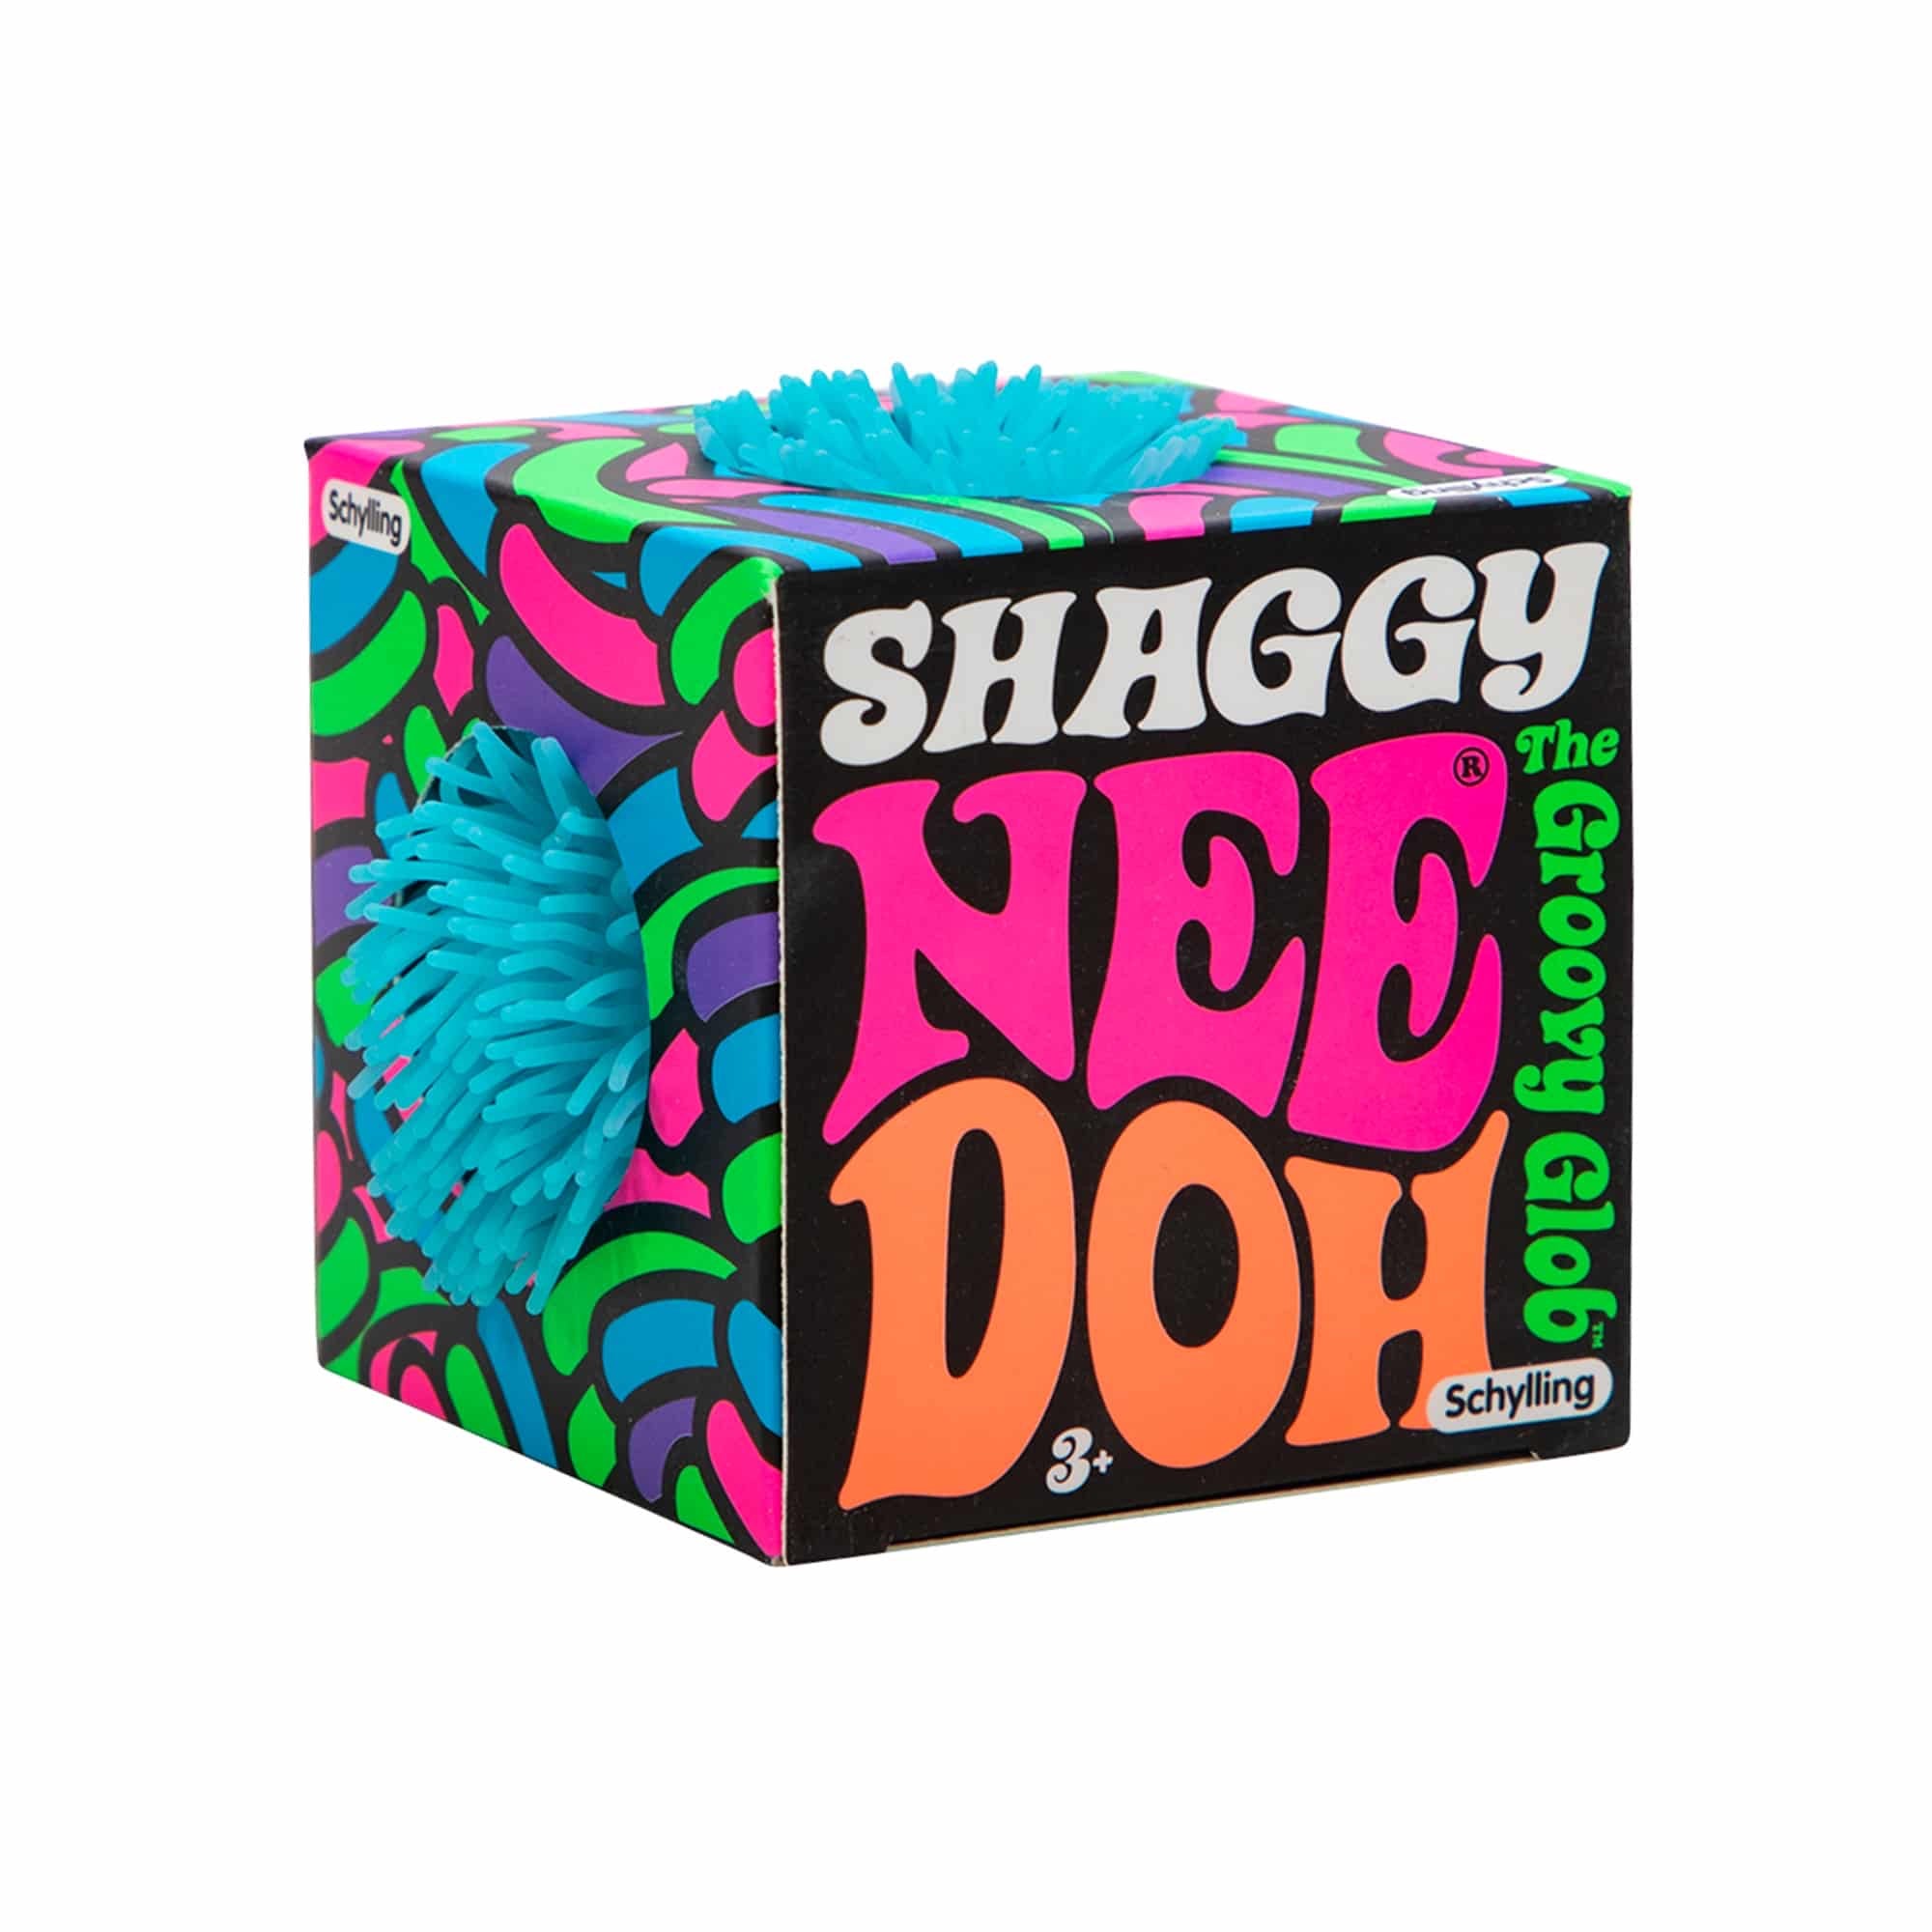 Shaggy Nee Doh by Schylling #SHND